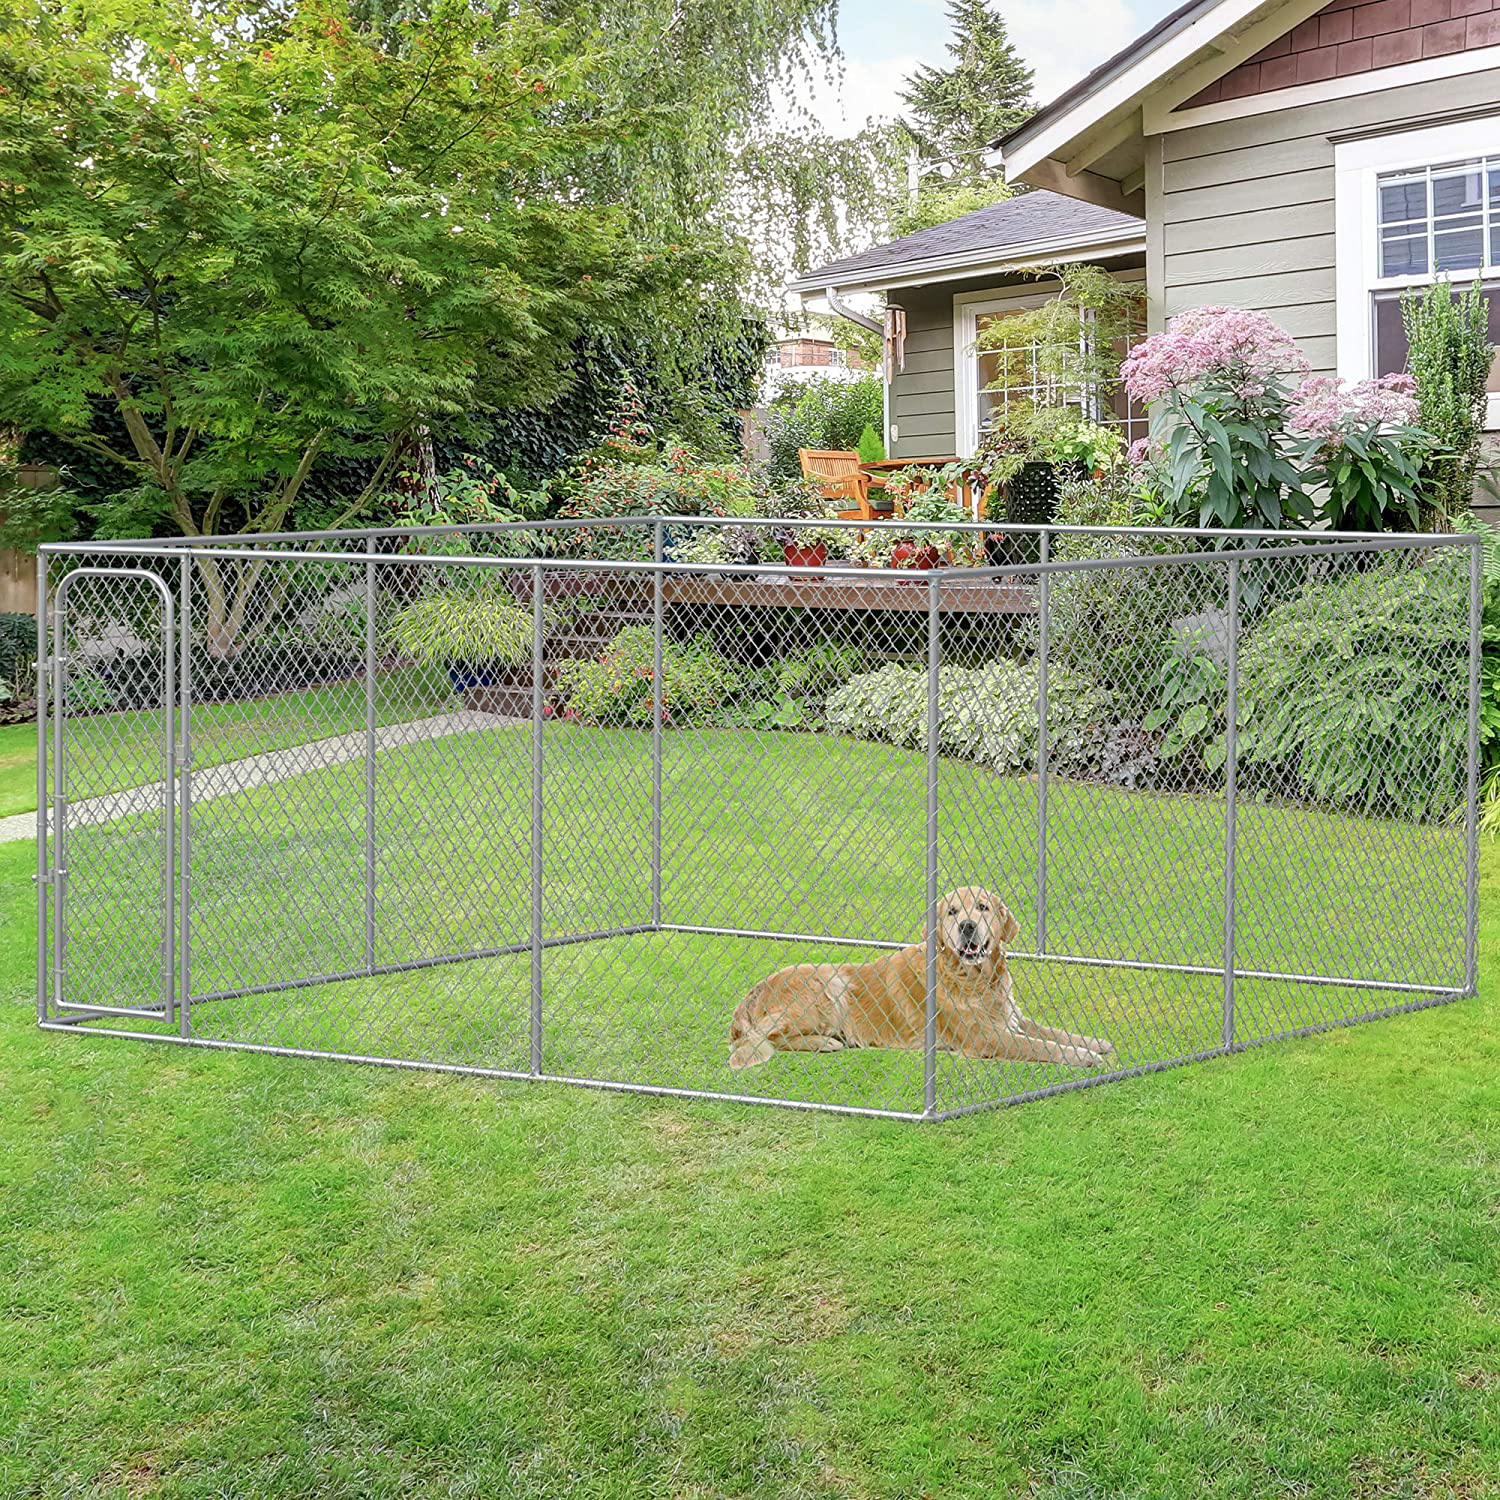 Pawhut Outdoor Dog Kennel Galvanized Chain Link Fence Heavy Duty Pet Run House Chicken Coop with Secure Lock Mesh Sidewalls for Backyard Garden Silver